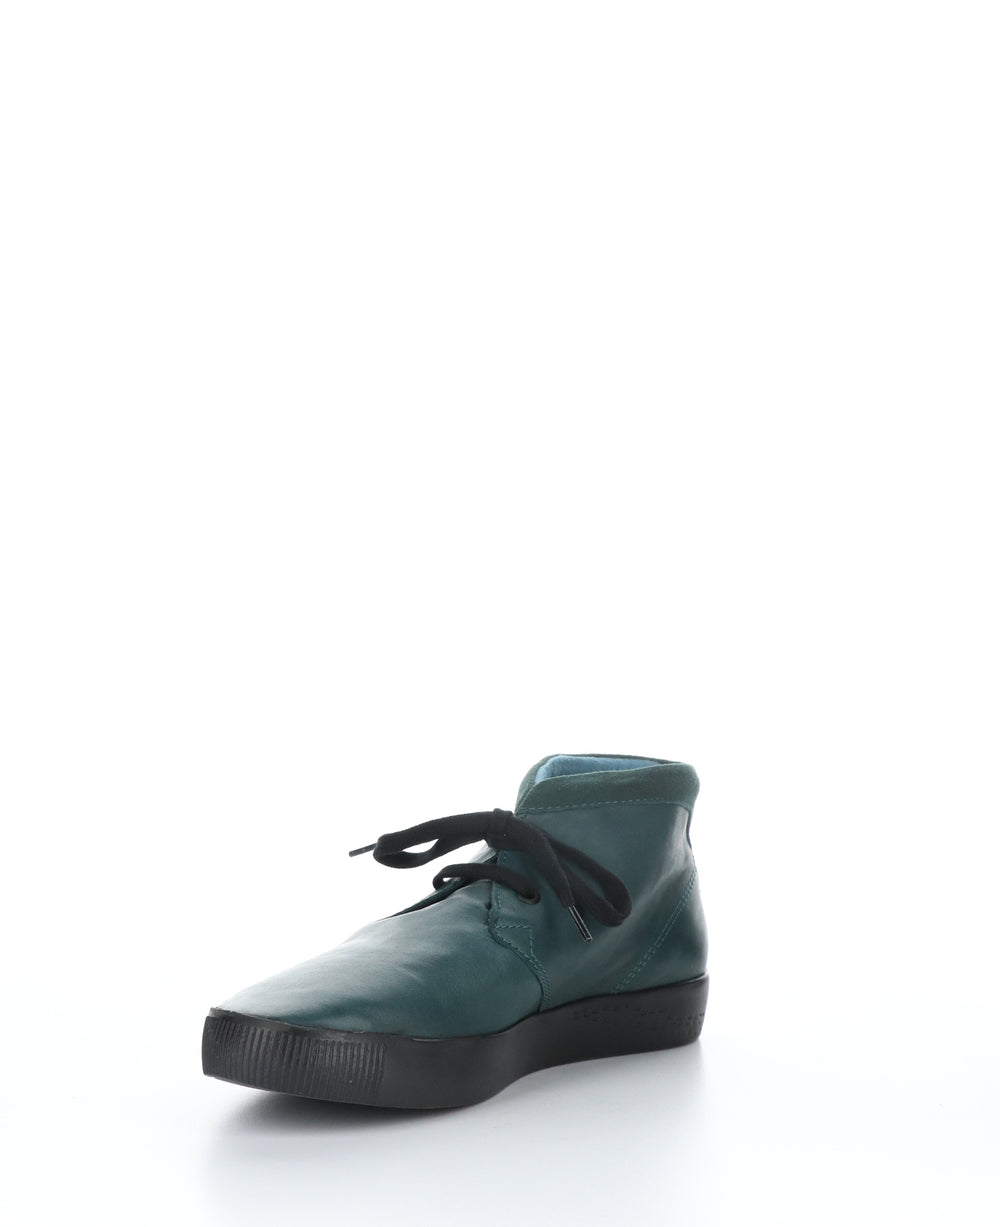 SIAL607SOF Forest Green Round Toe Shoes